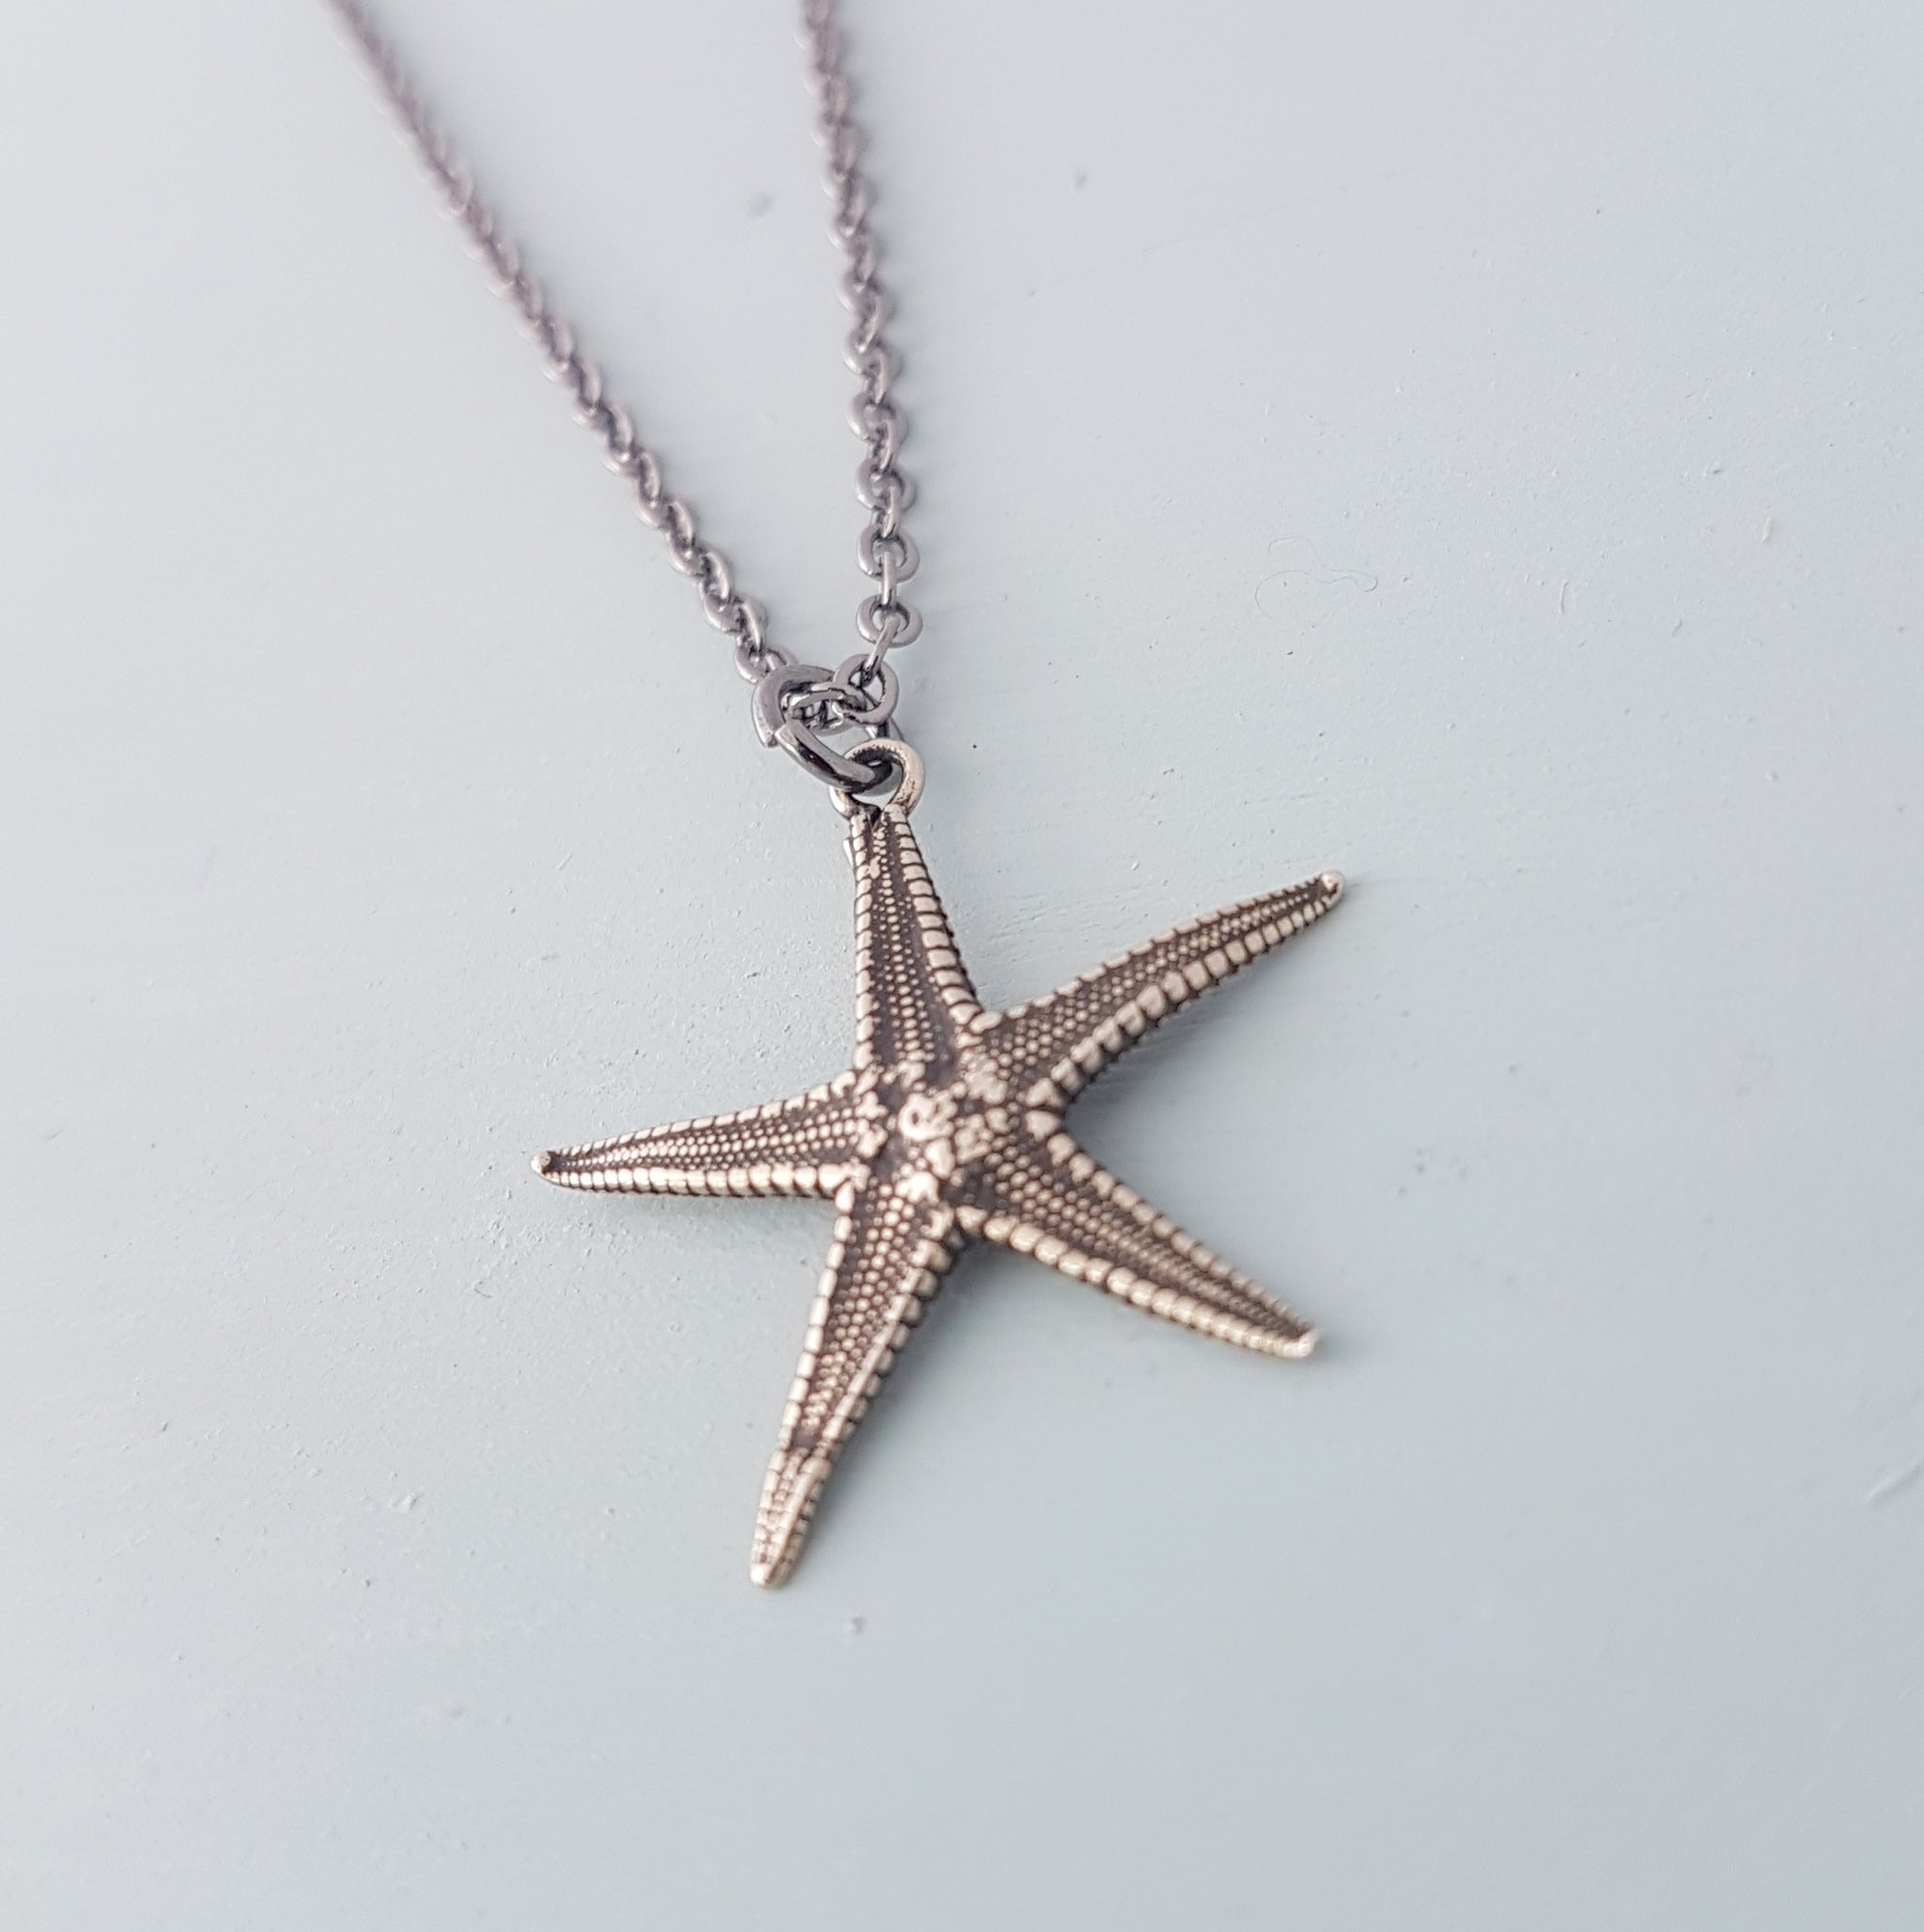 Starfish Necklace - Gwen Delicious Jewelry Designs